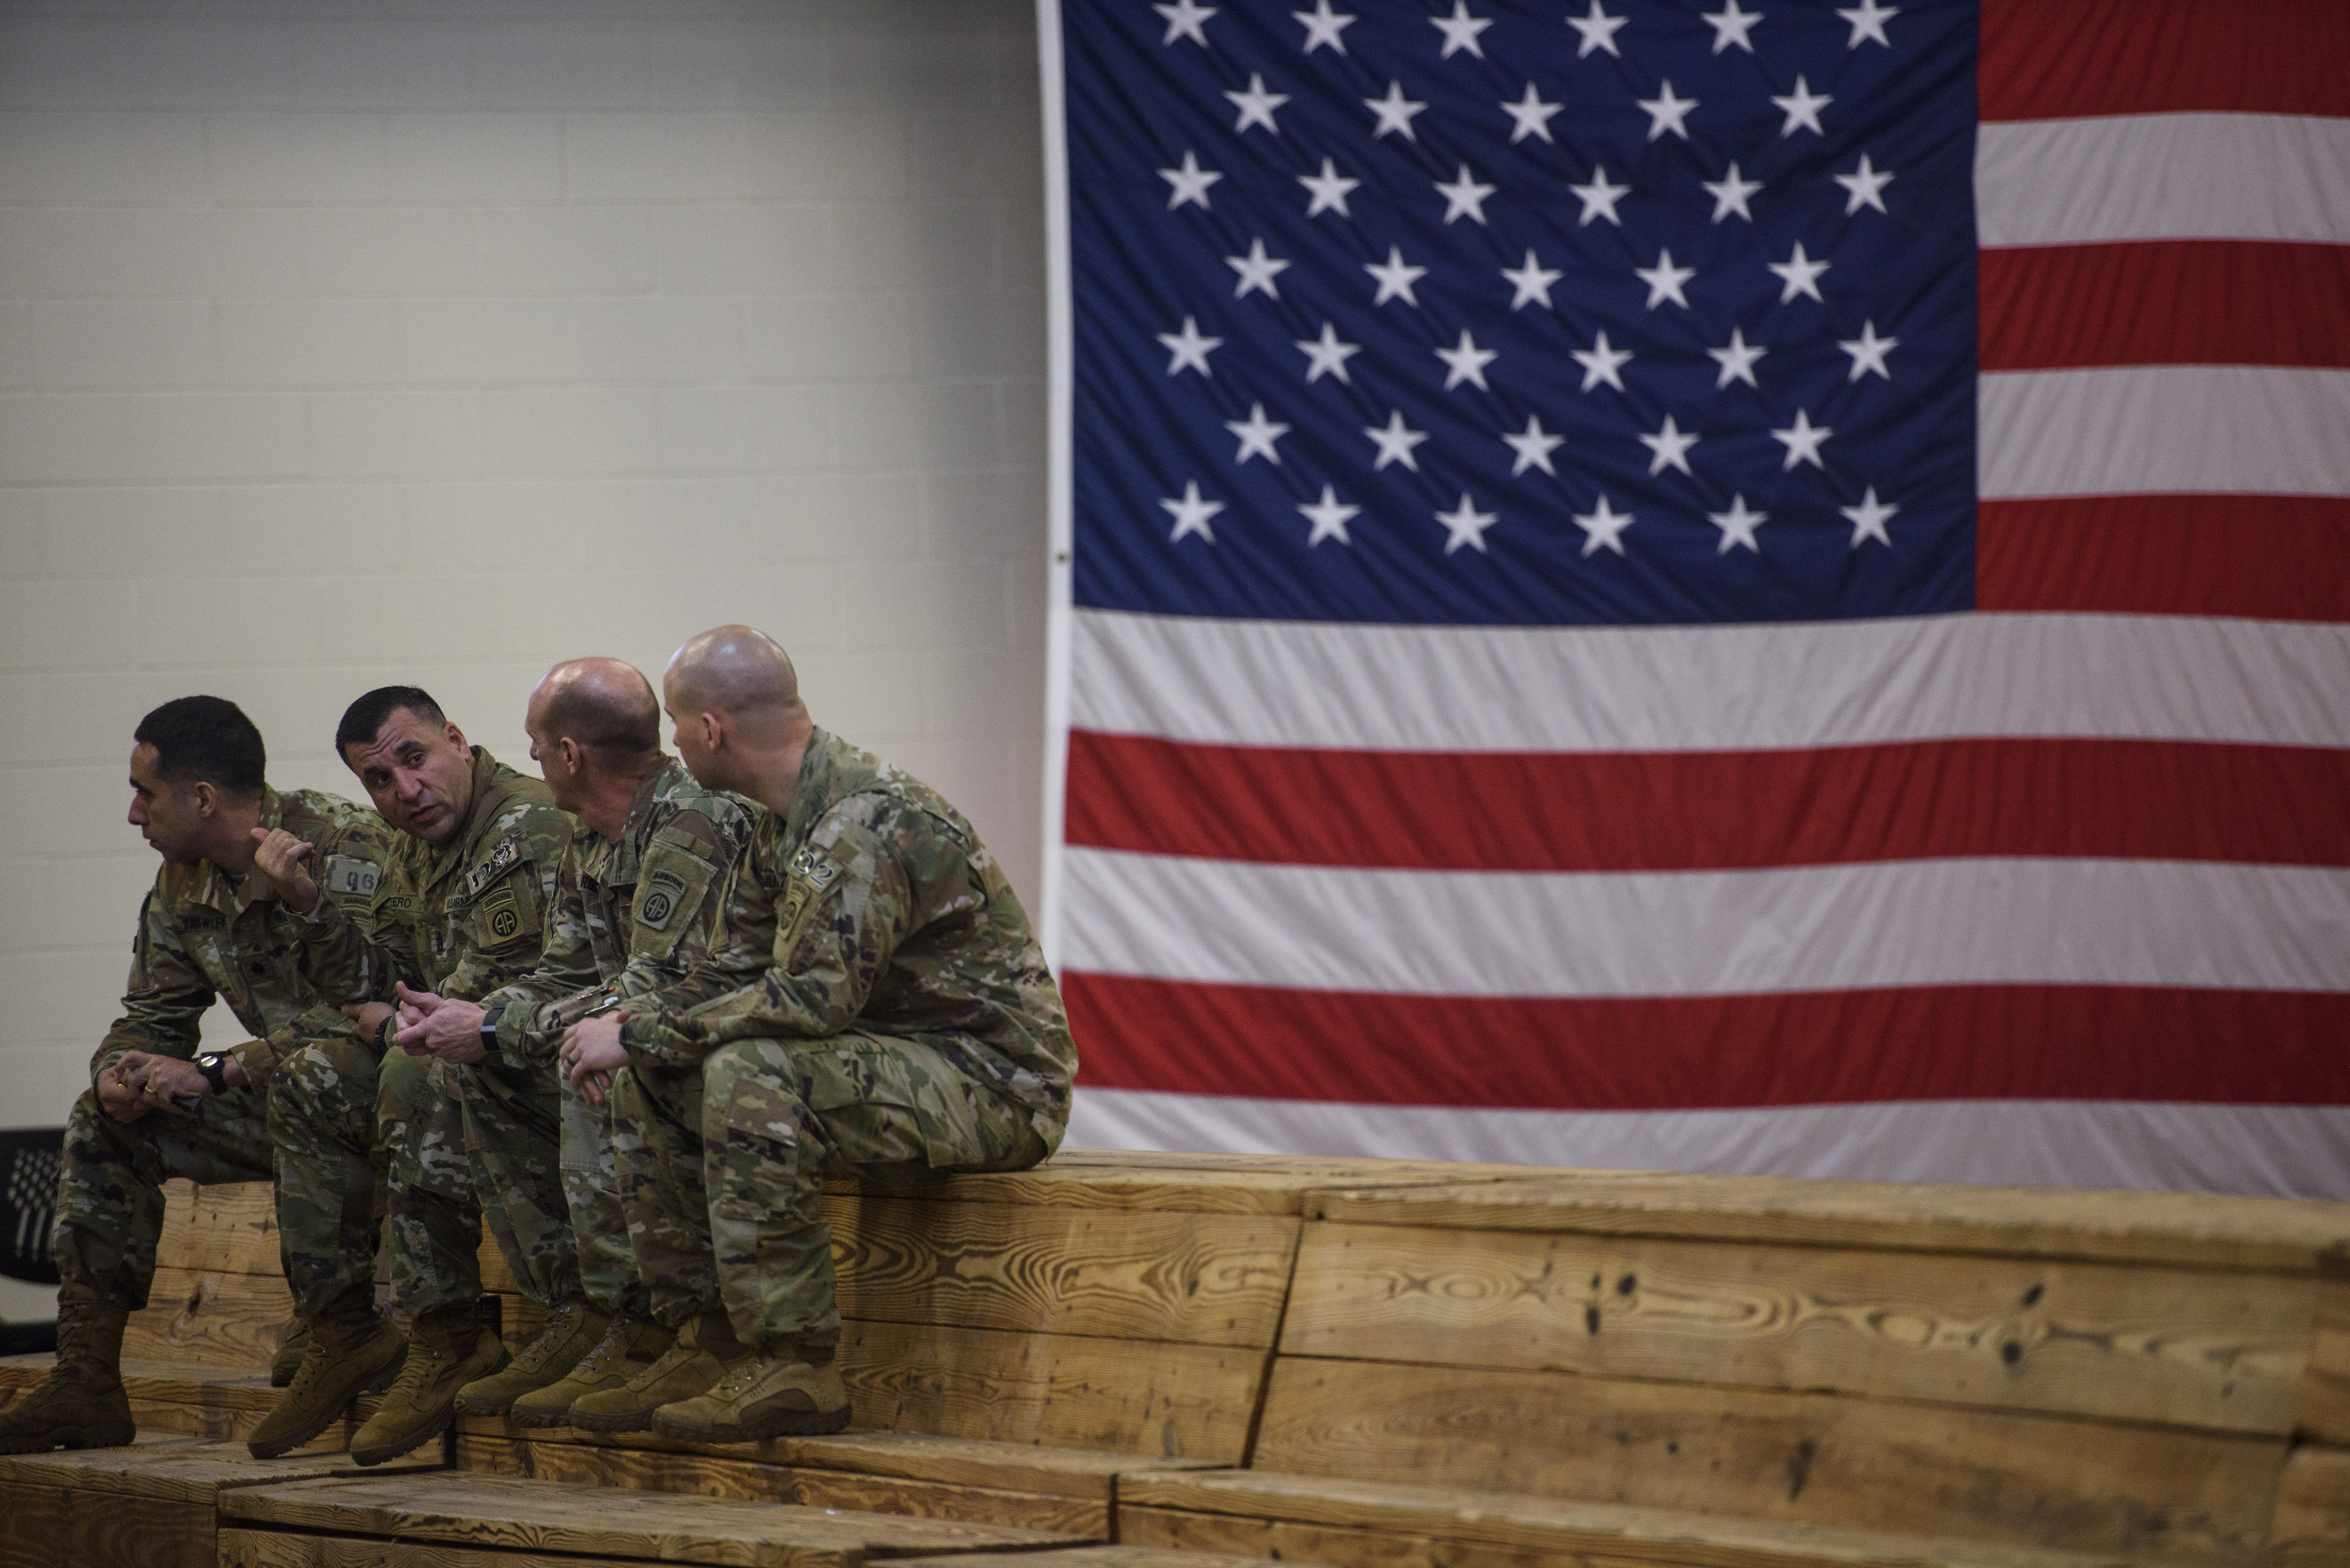 trump iran U.S Army Soldiers with the 82nd Airborne Division wait to be deployed to the Middle East on Saturday, Jan. 4, 2020 from Fort Bragg, N. C. (Melissa Sue Gerrits/The Fayetteville Observer via AP)